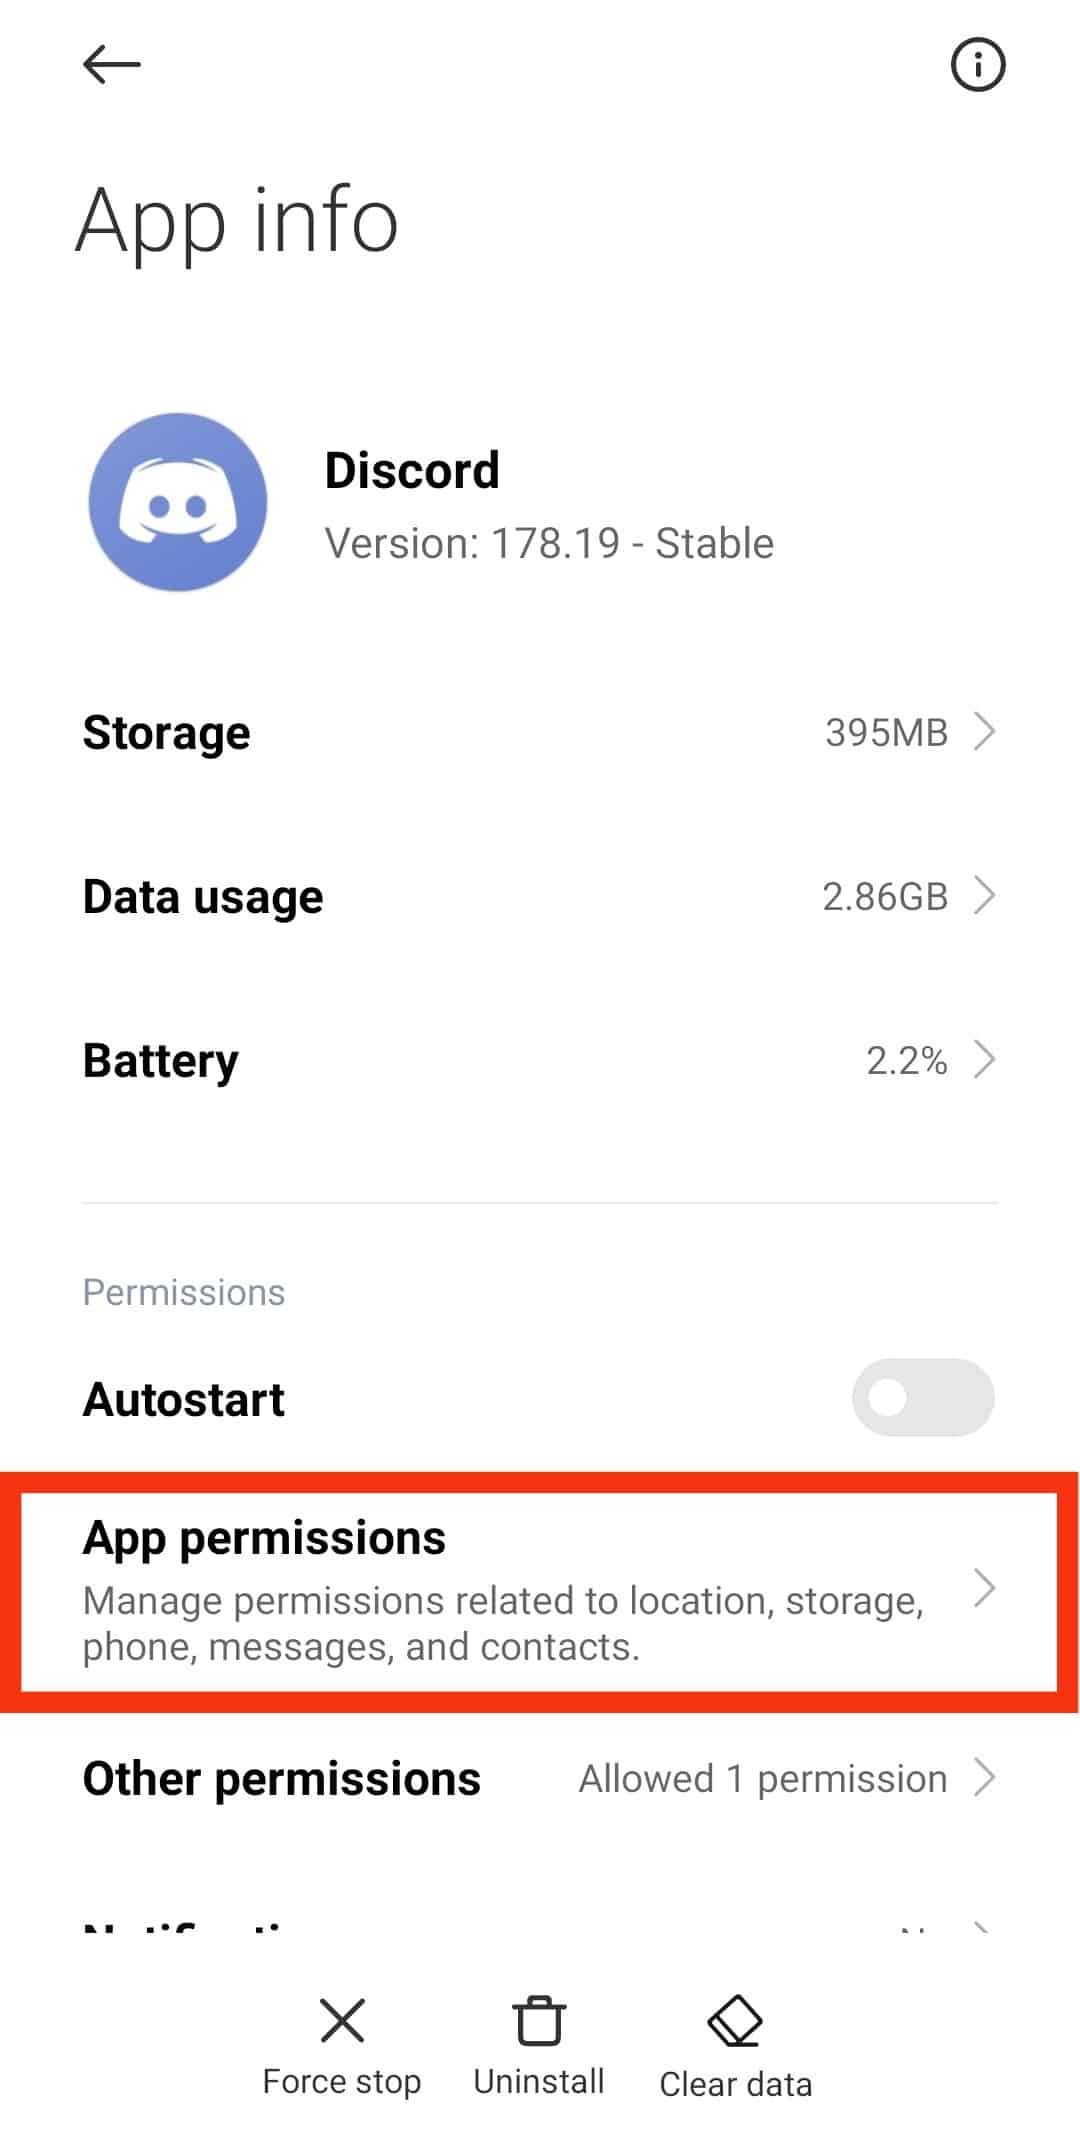 Click On The “Permissions” Or App Permissions Option